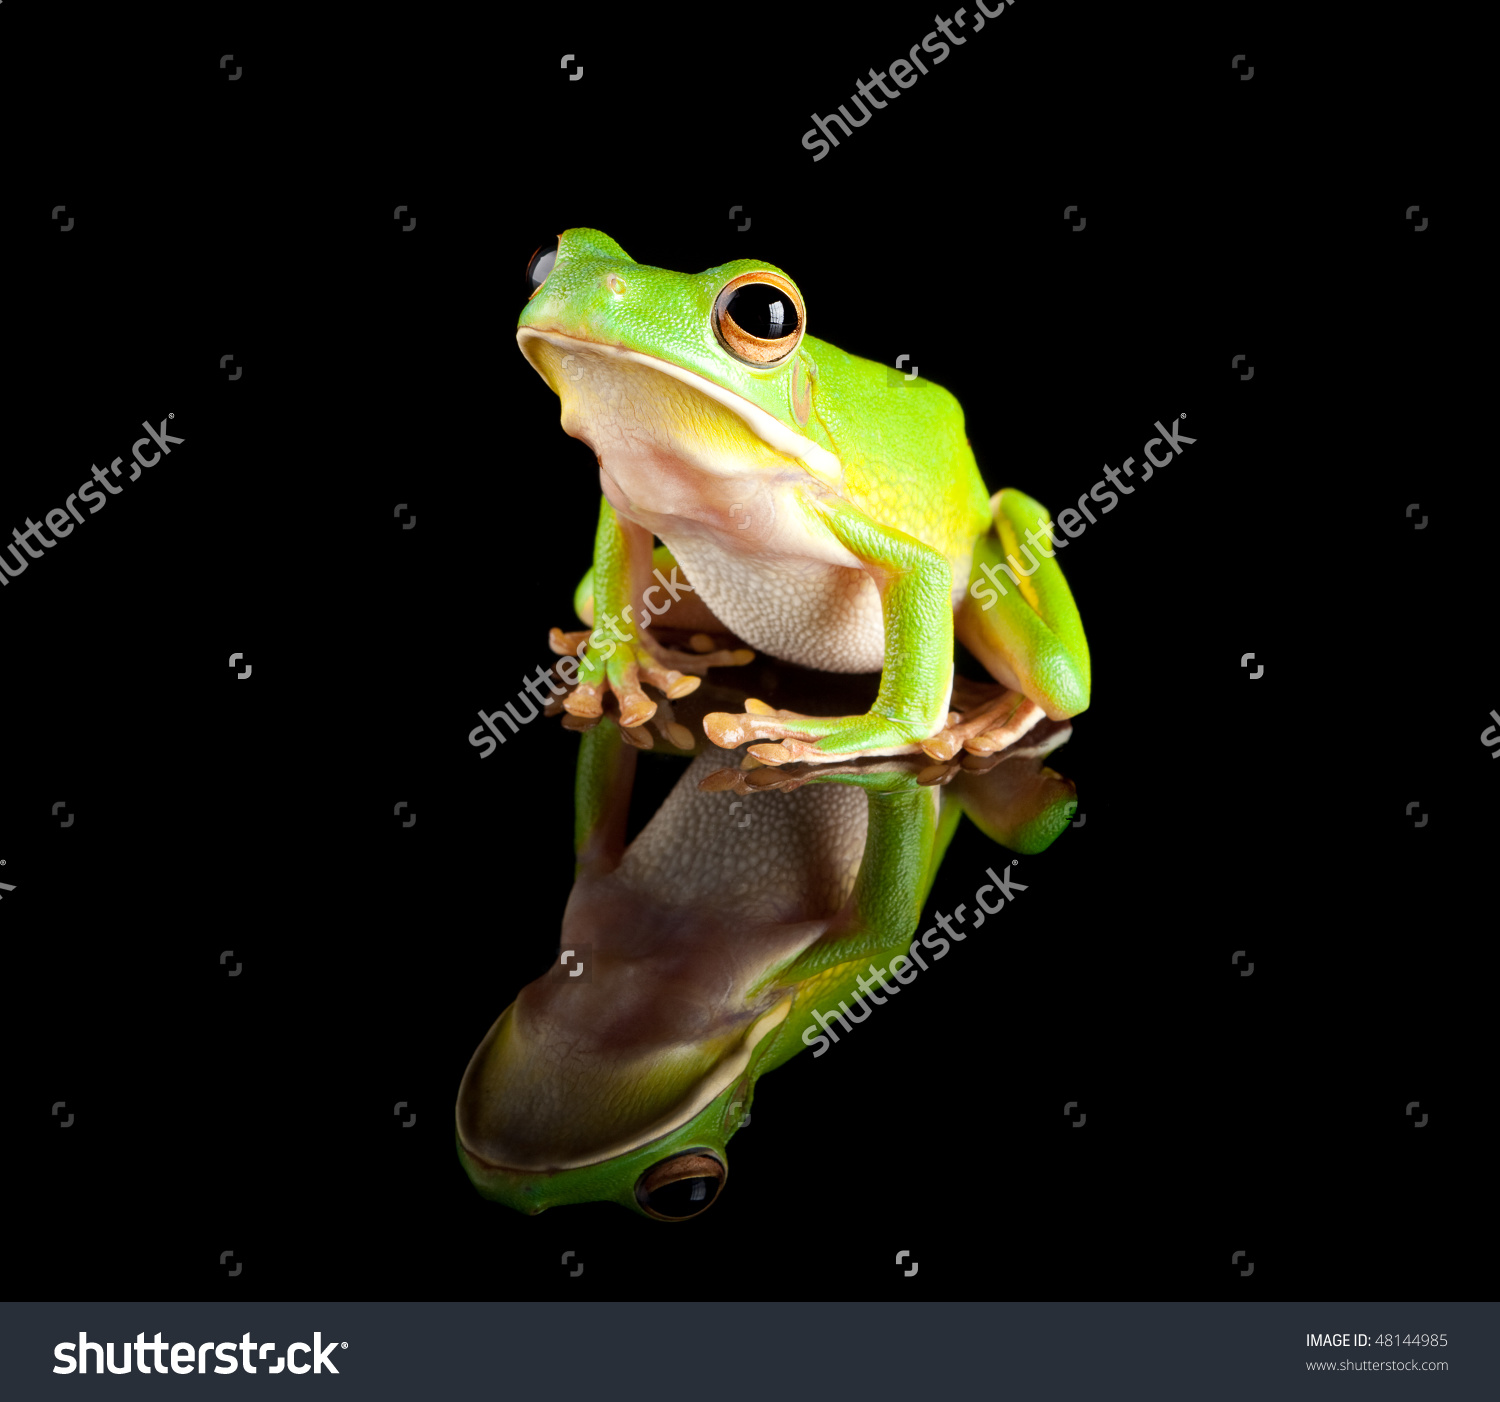 Amazing White-lipped Tree Frog Pictures & Backgrounds